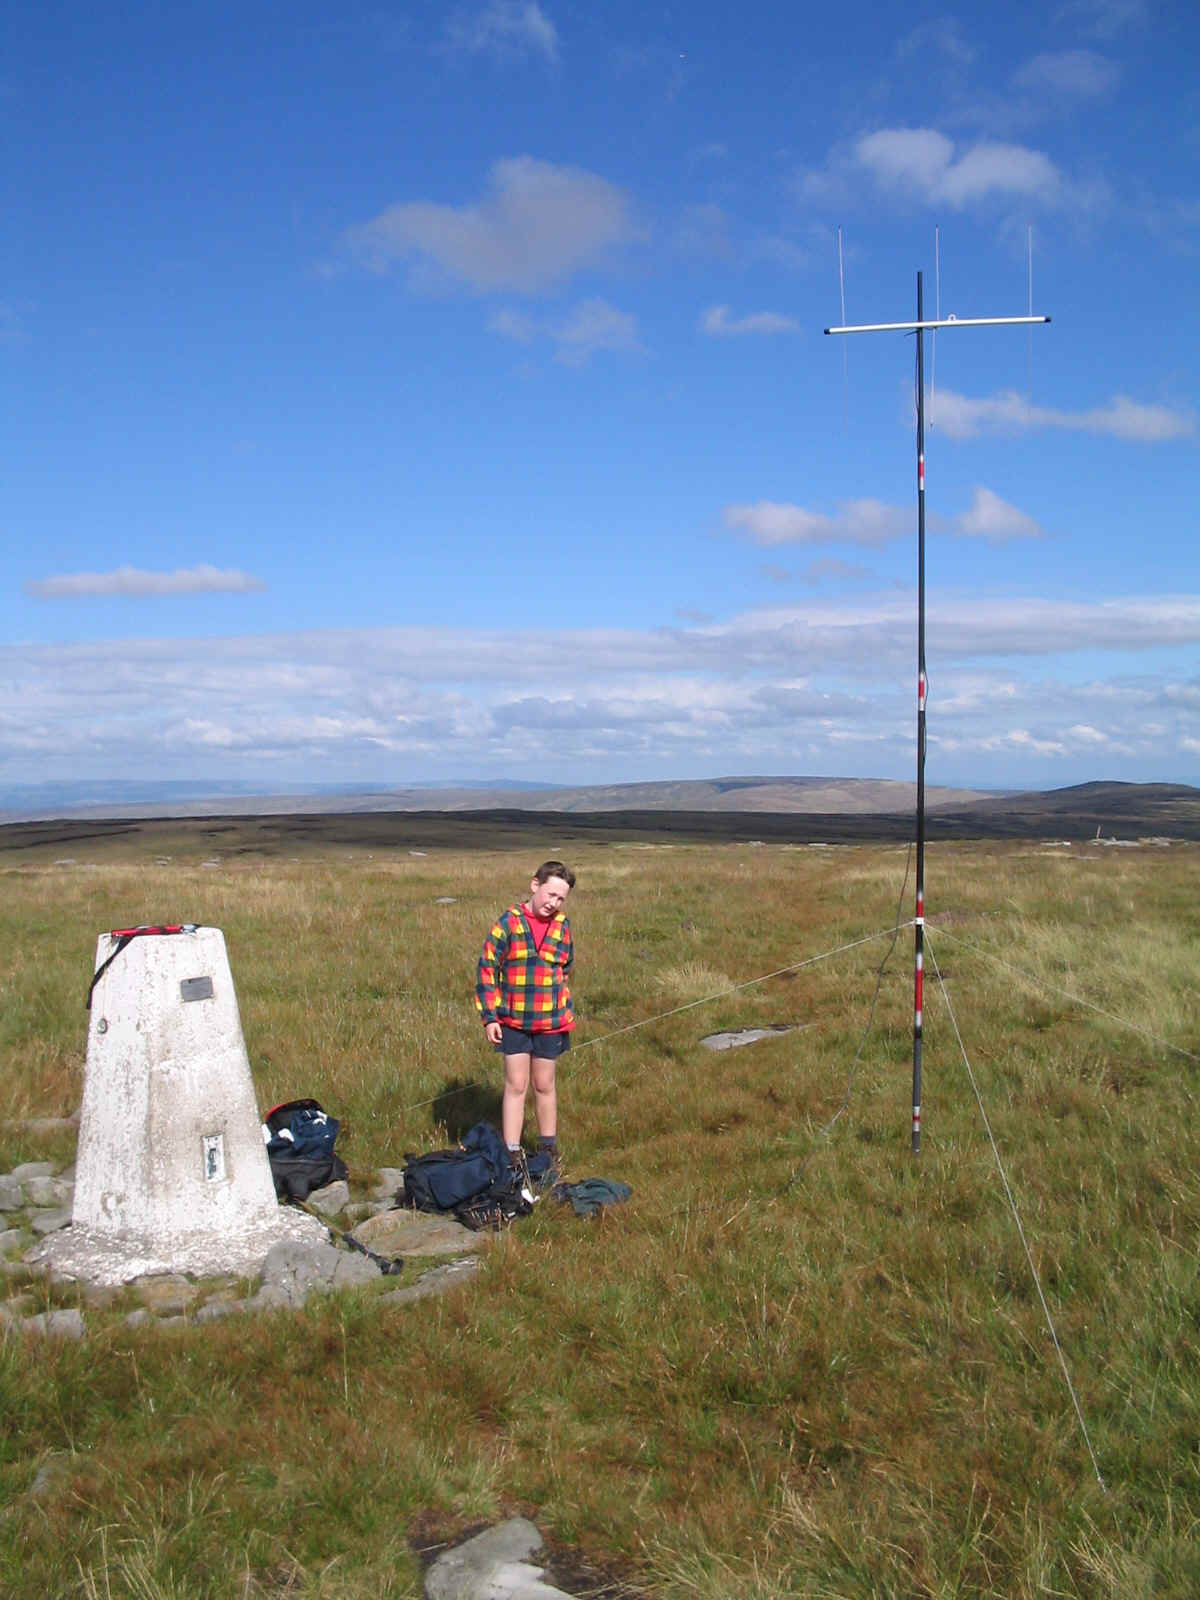 Trig point, Jimmy & SOTA Beam on SP-003